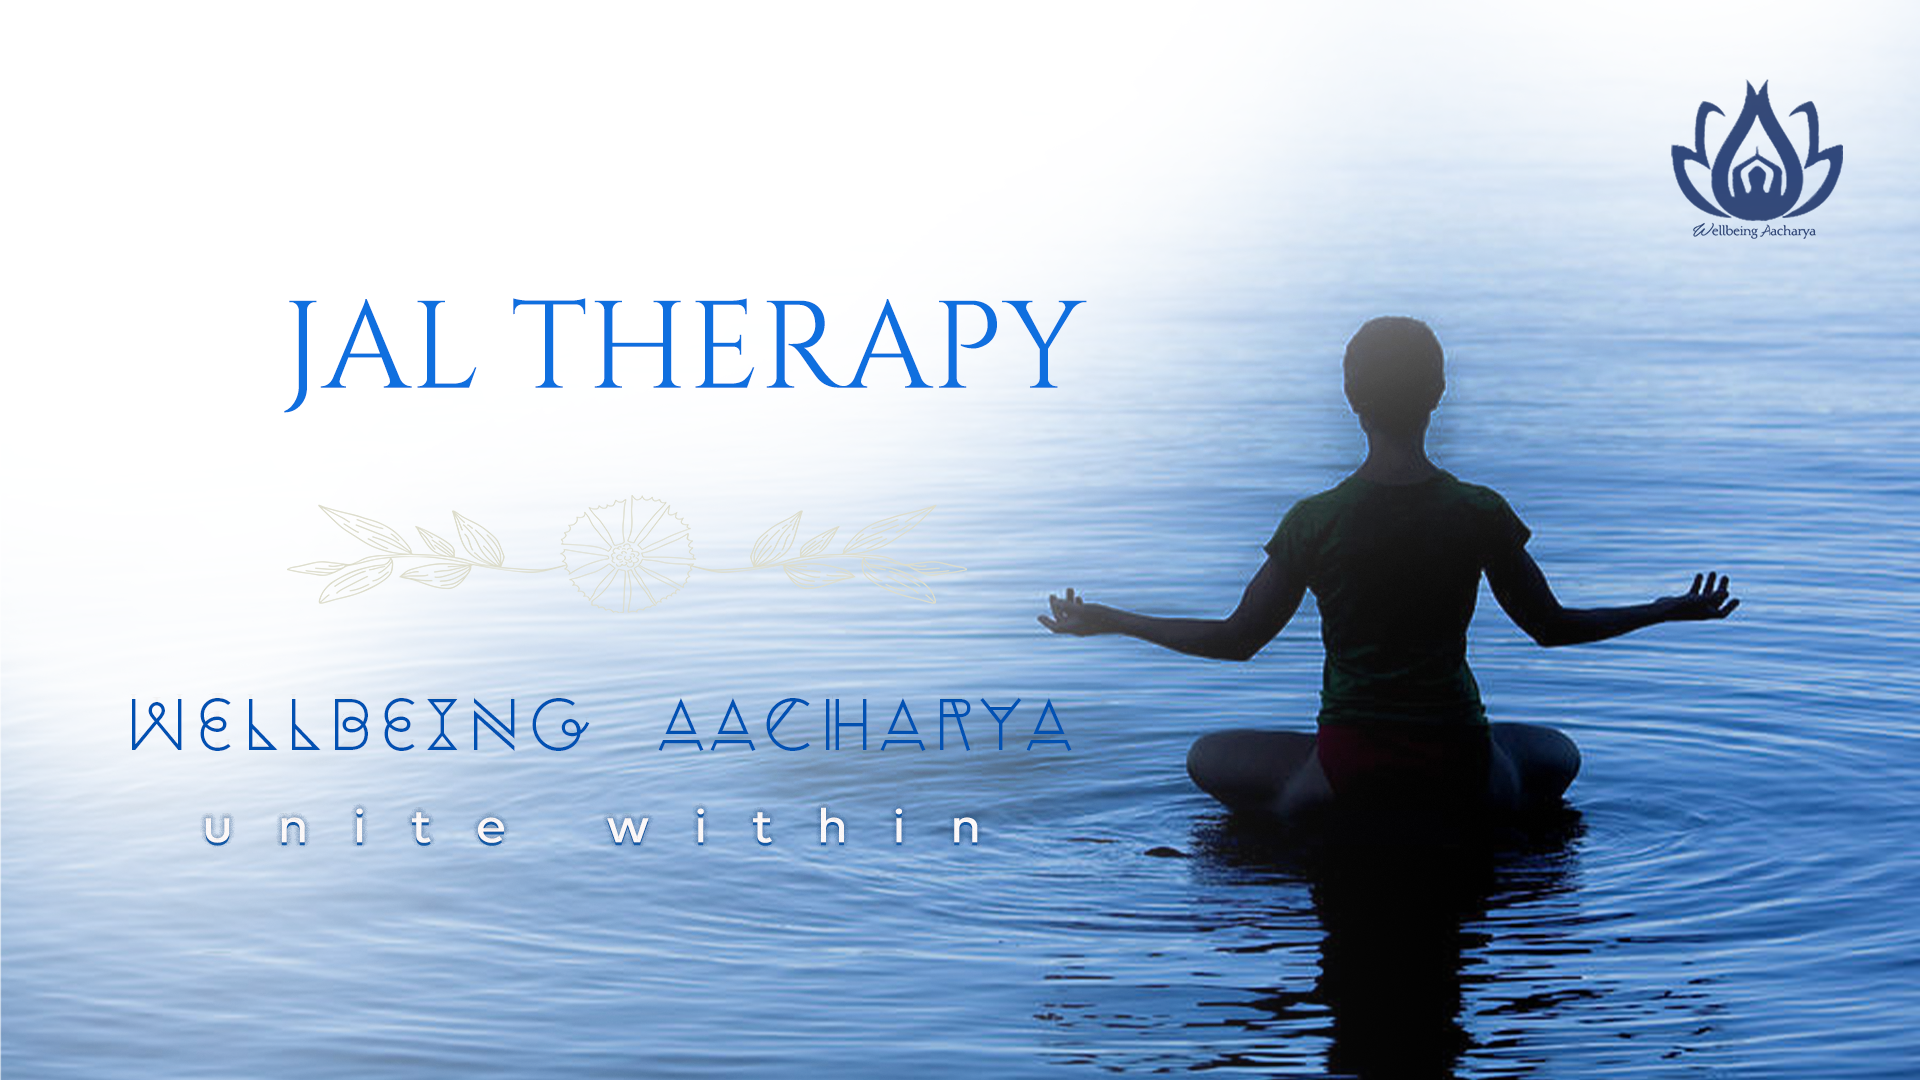 JAL THERAPY